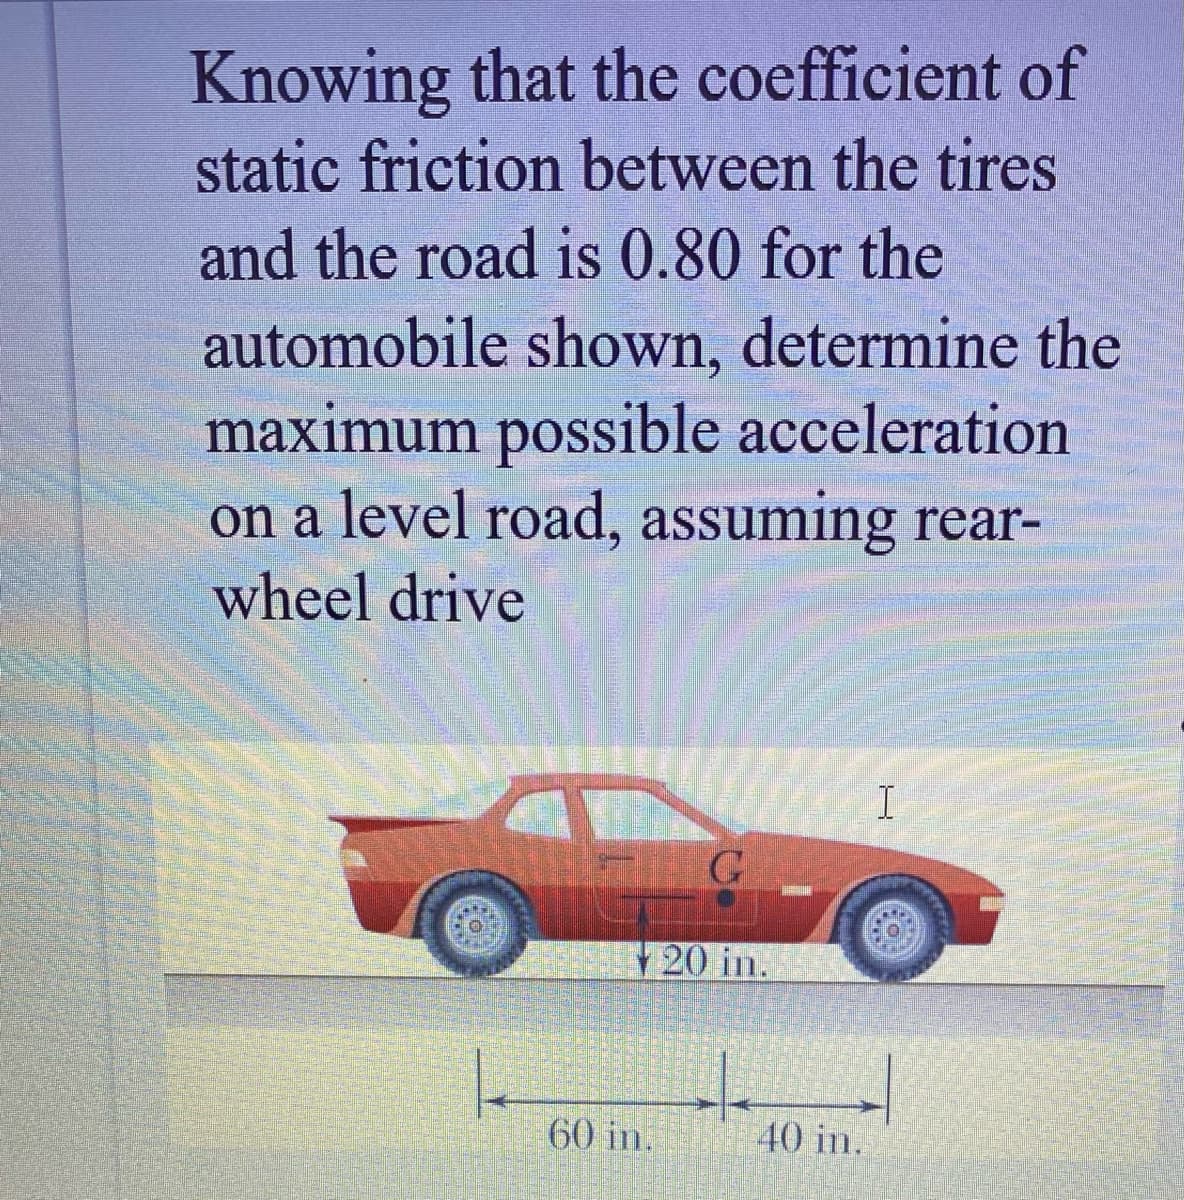 Knowing that the coefficient of
static friction between the tires
and the road is 0.80 for the
automobile shown, determine the
maximum possible acceleration
on a level road, assuming rear-
wheel drive
20 in.
60 in.
40 in.
